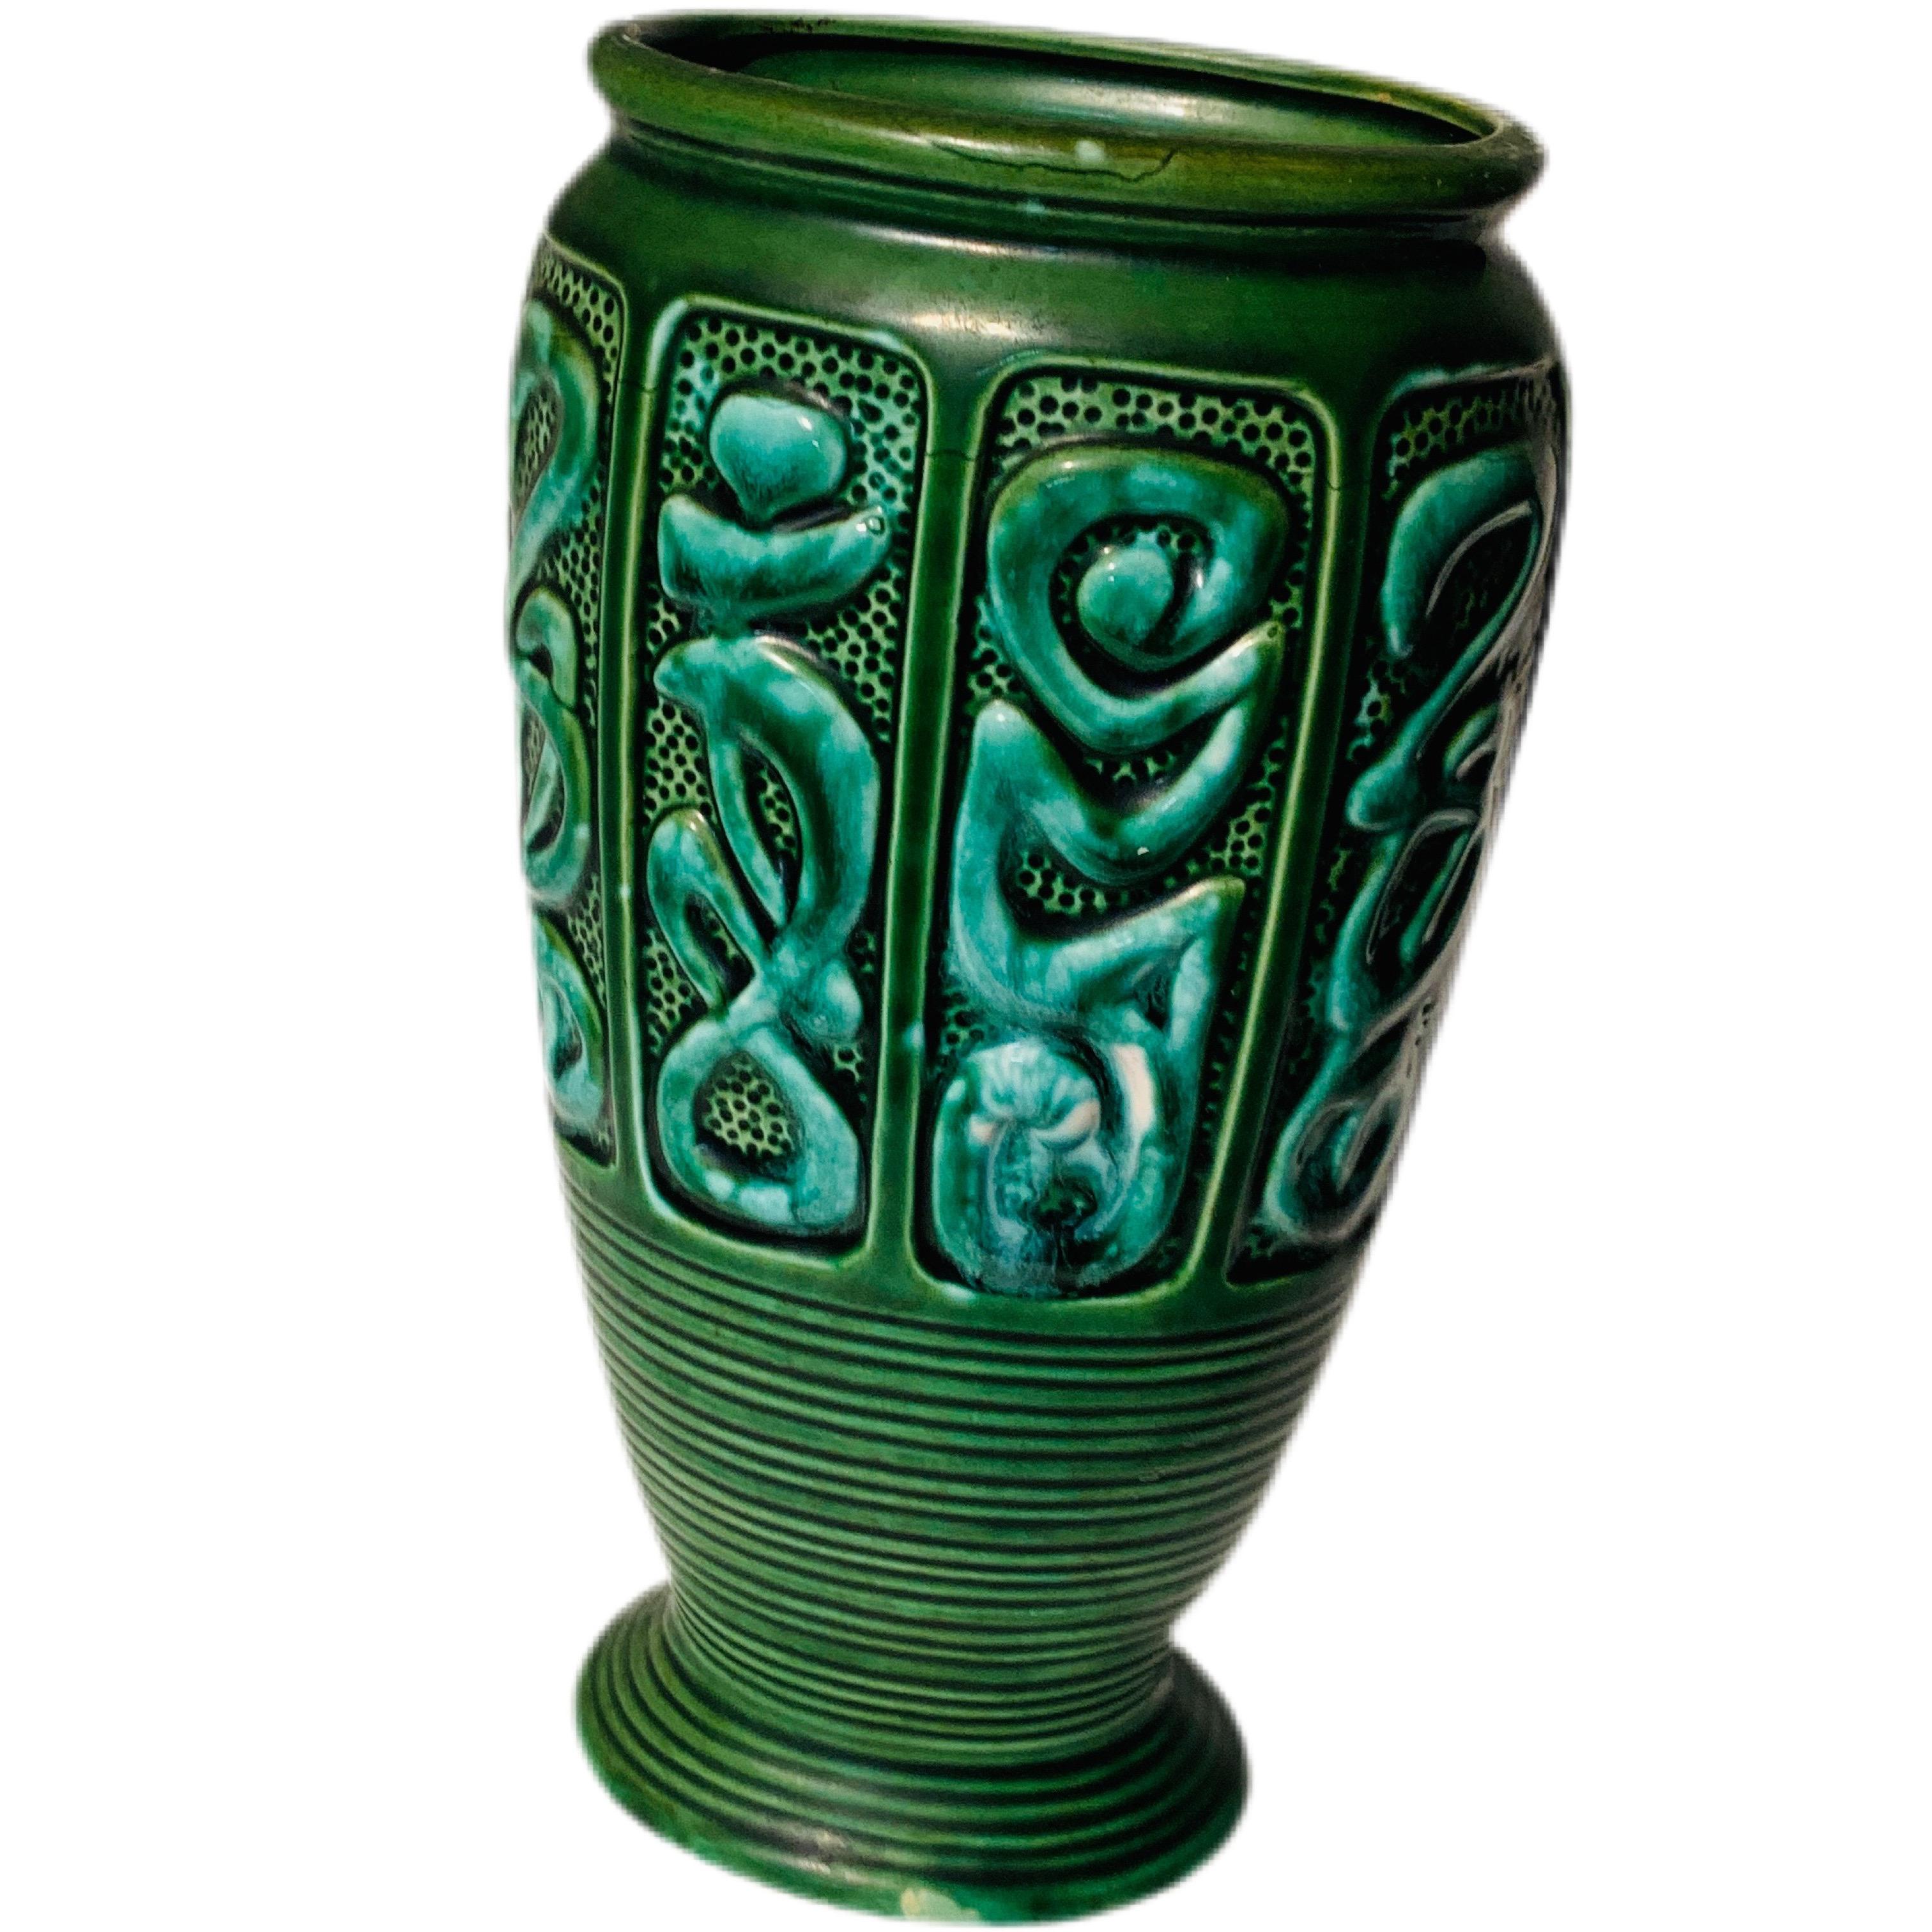 A green Japanese-made ceramic vase with an abstract design circling the top half. The piece is in great shape with no chips or cracks or discoloration. You may notice what looks like a crack on the rim of the piece. It appears this was done by the